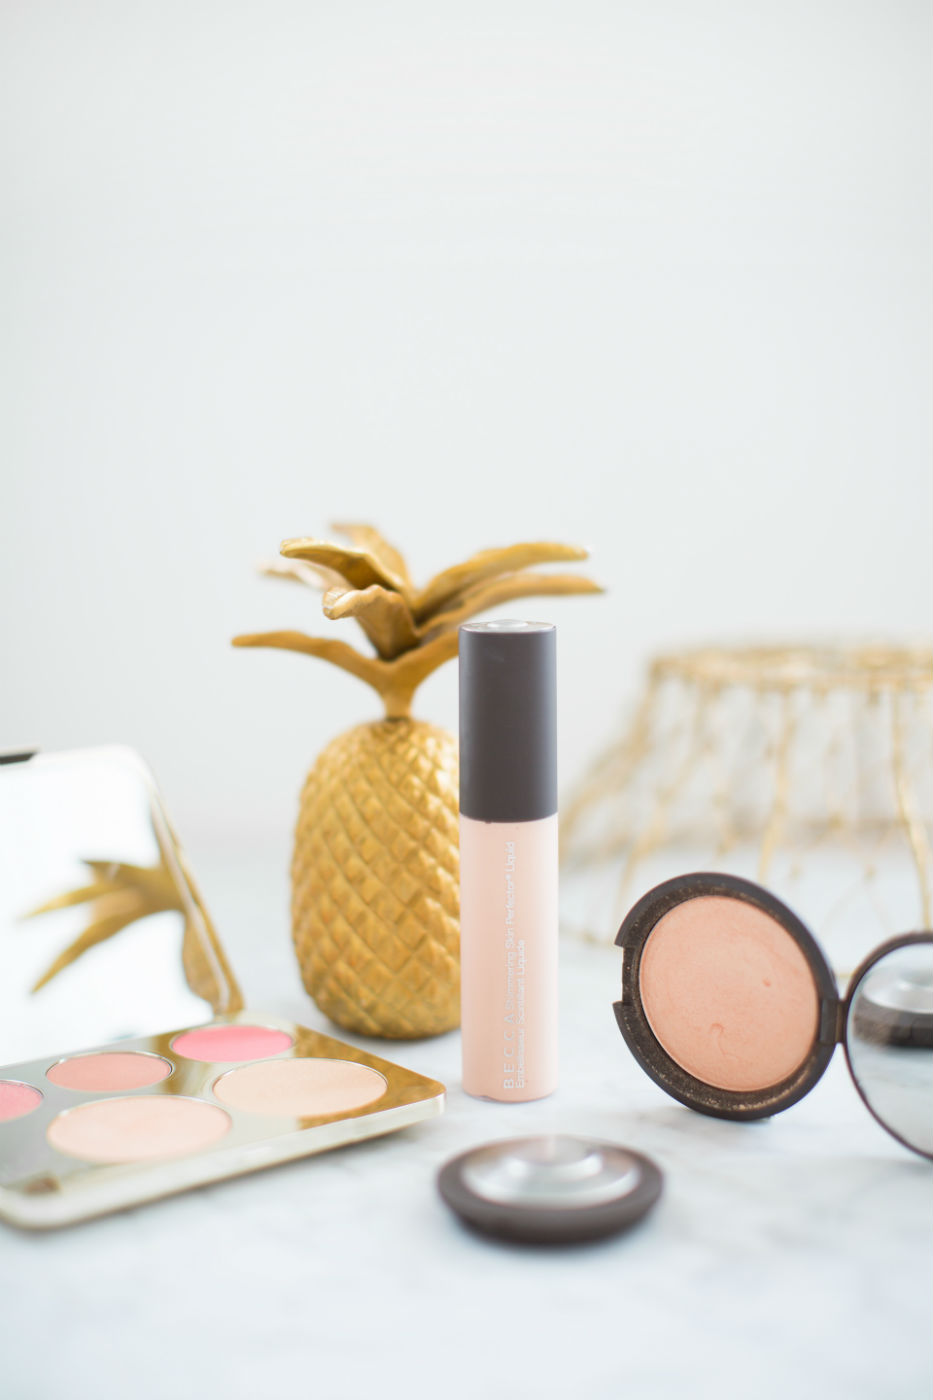 lily-pebbles-champagne-pop-becca-collection-3